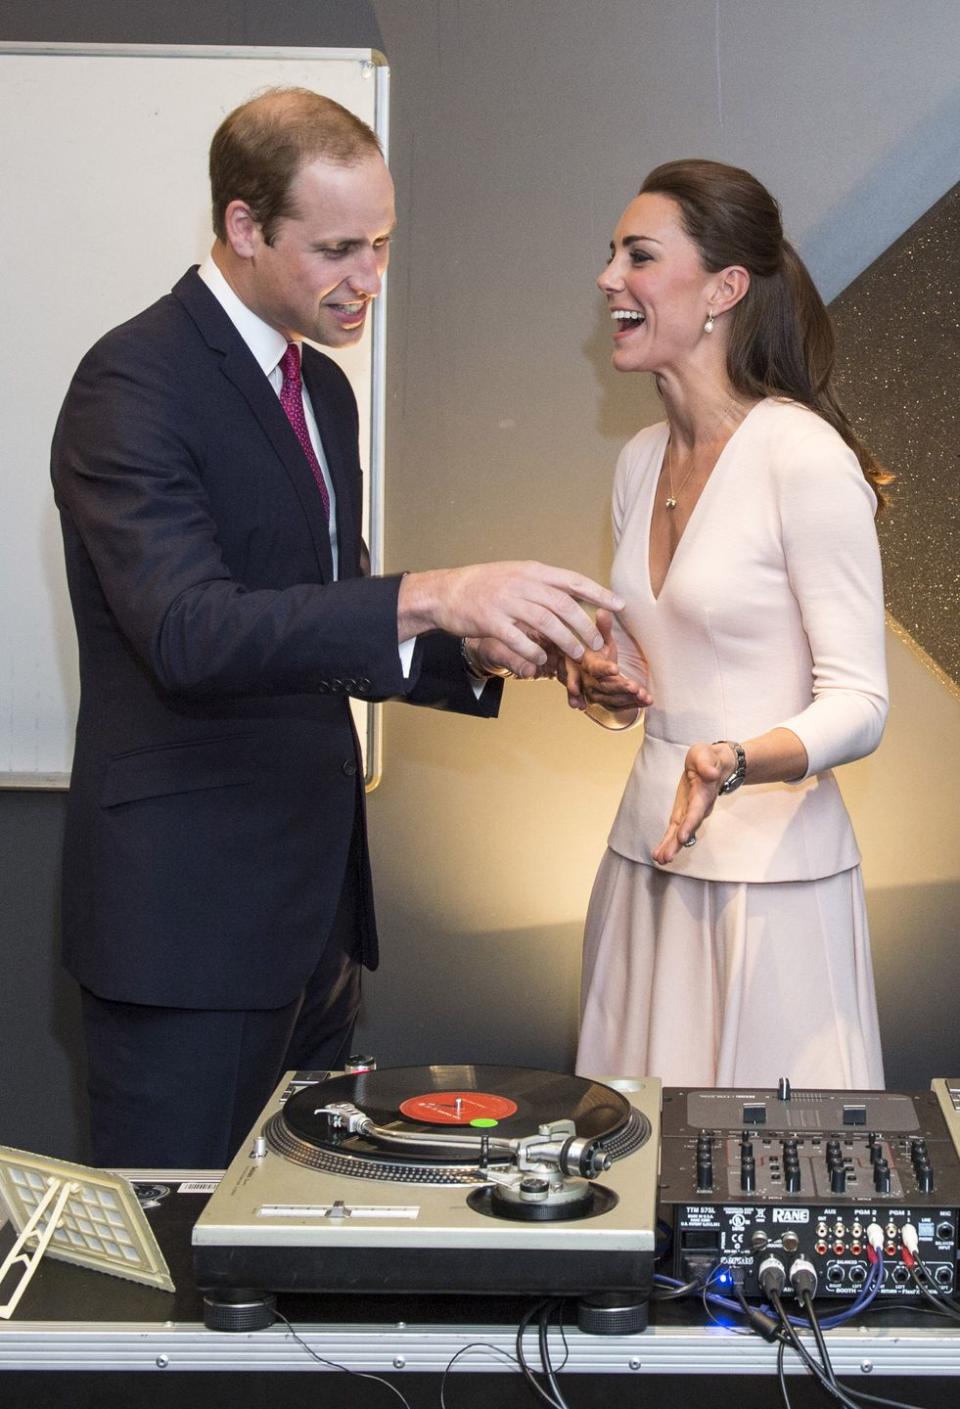 "And now you want to try DJing?"